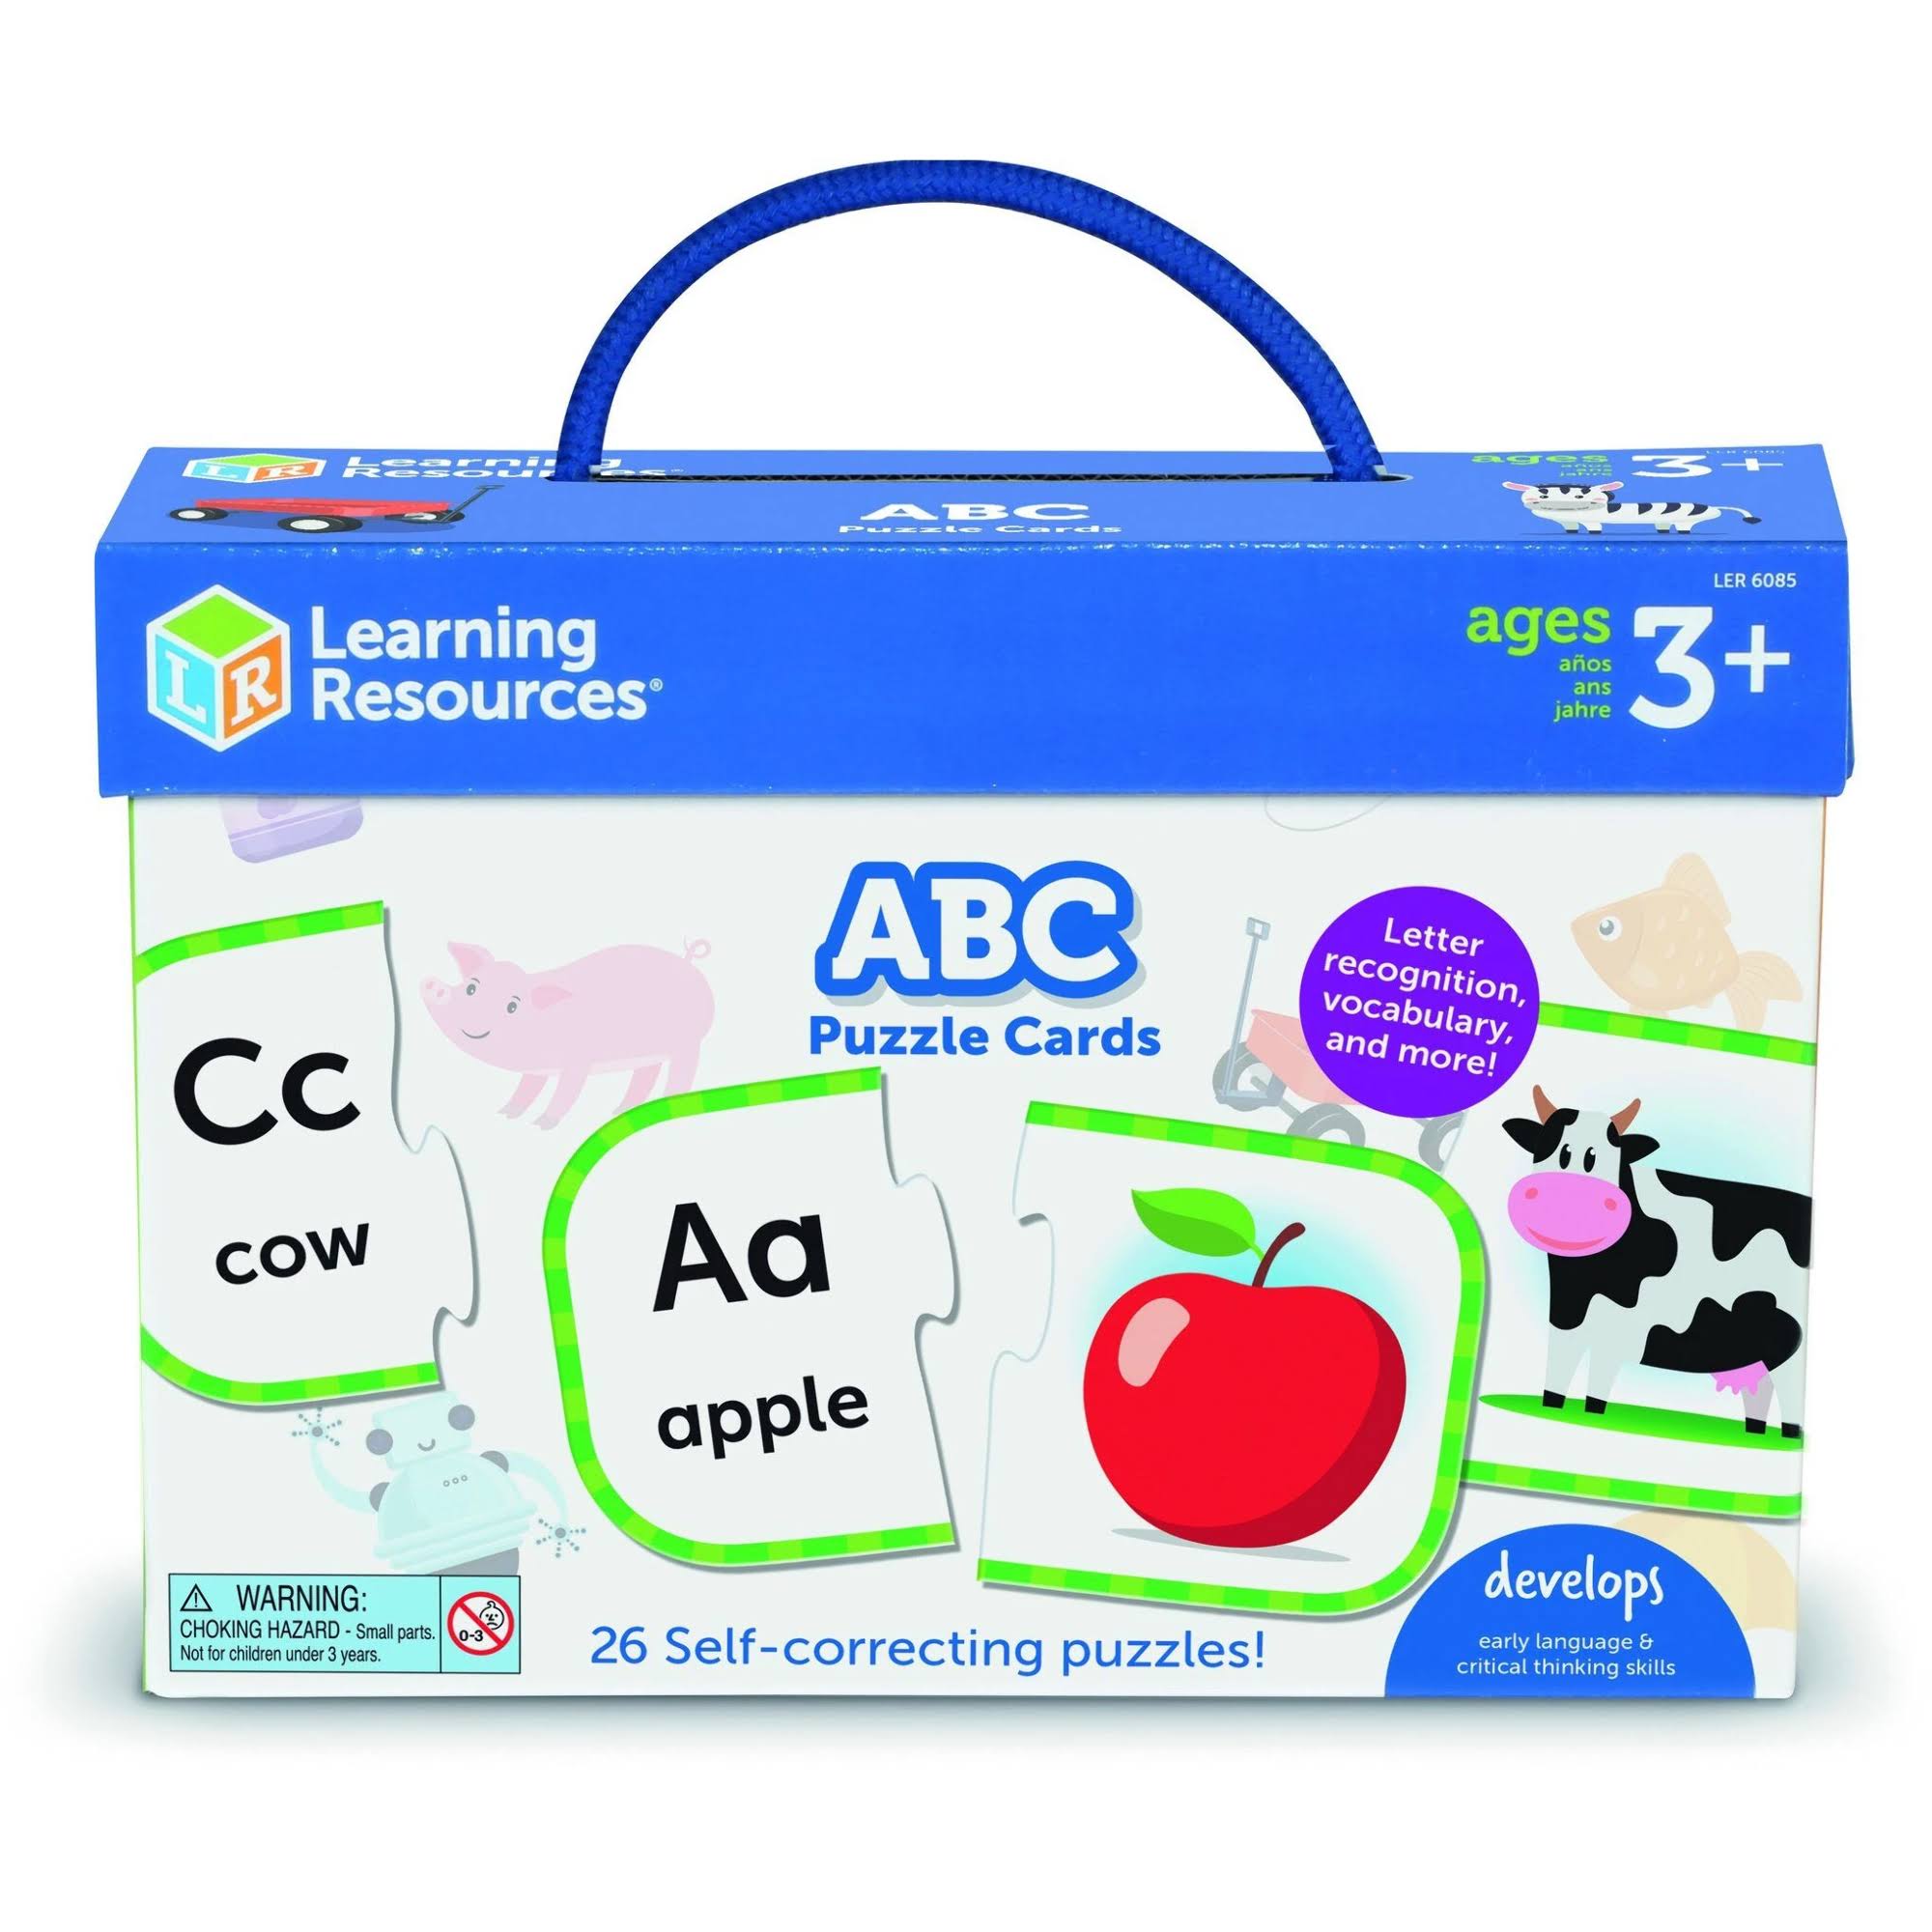 Learning Resources ABC Puzzle Cards | LER6085